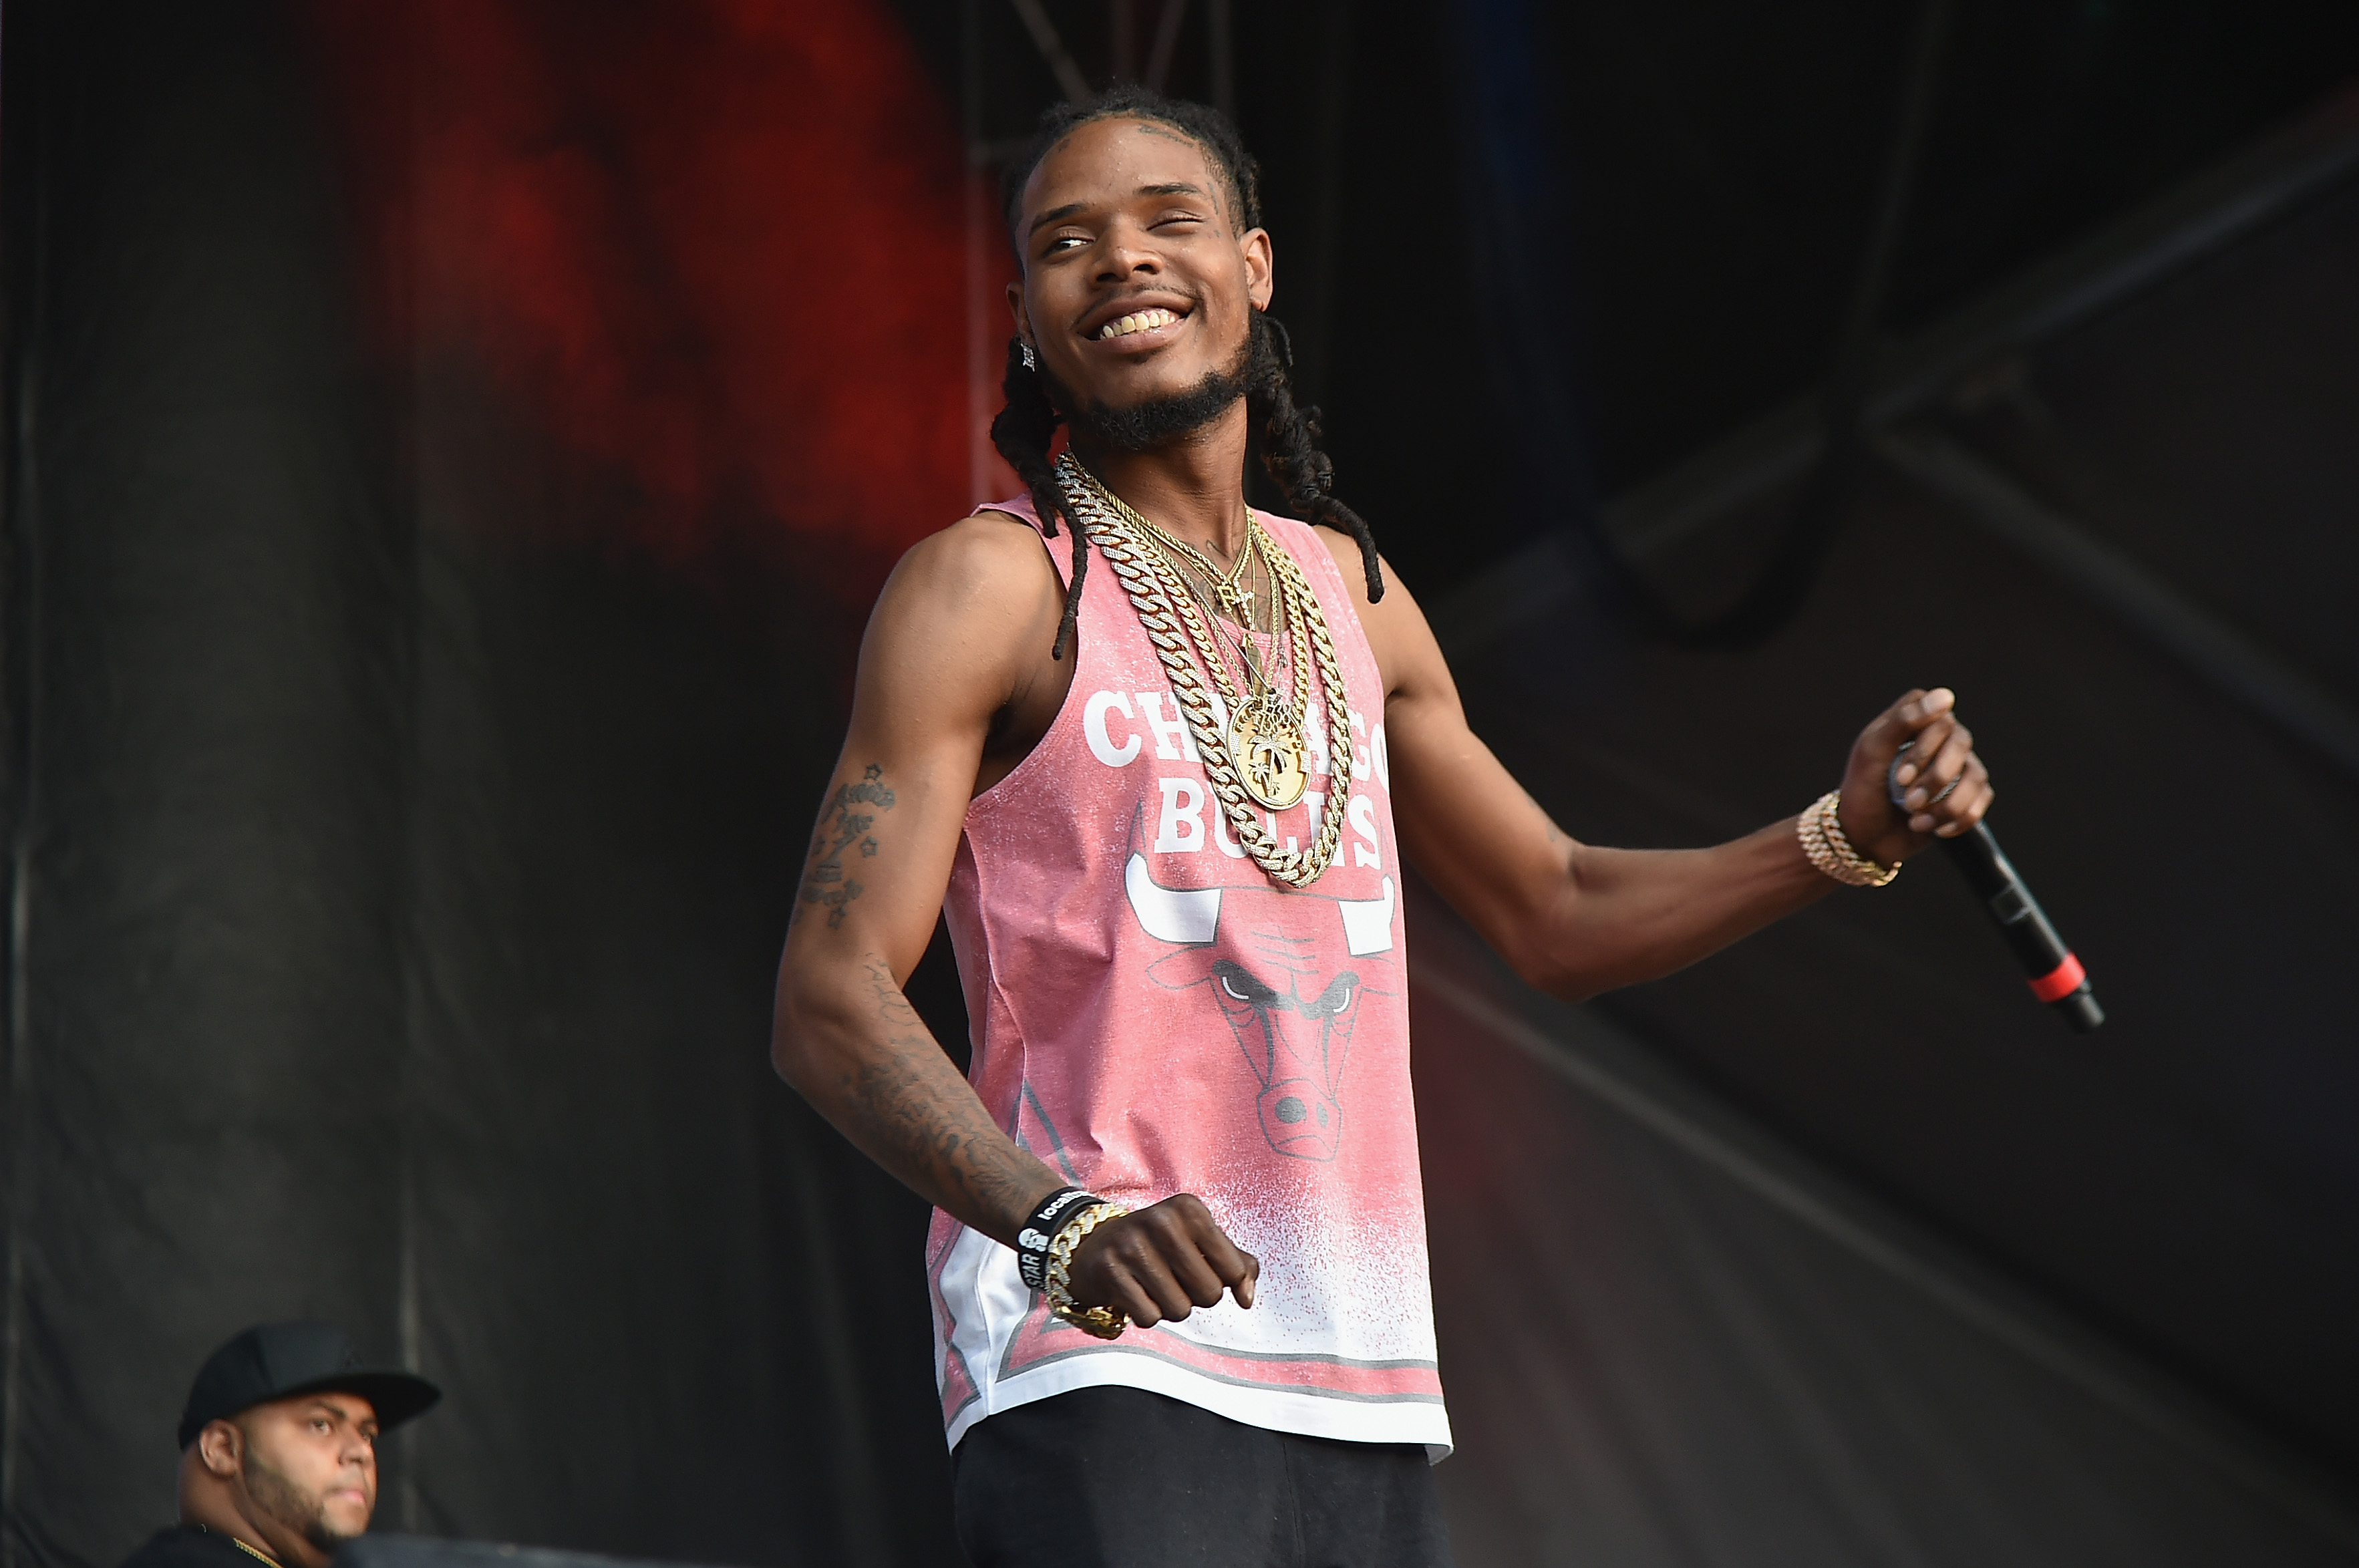 Fetty Wap Arrested After Allegedly Threatening To Kill A Man On FaceTime